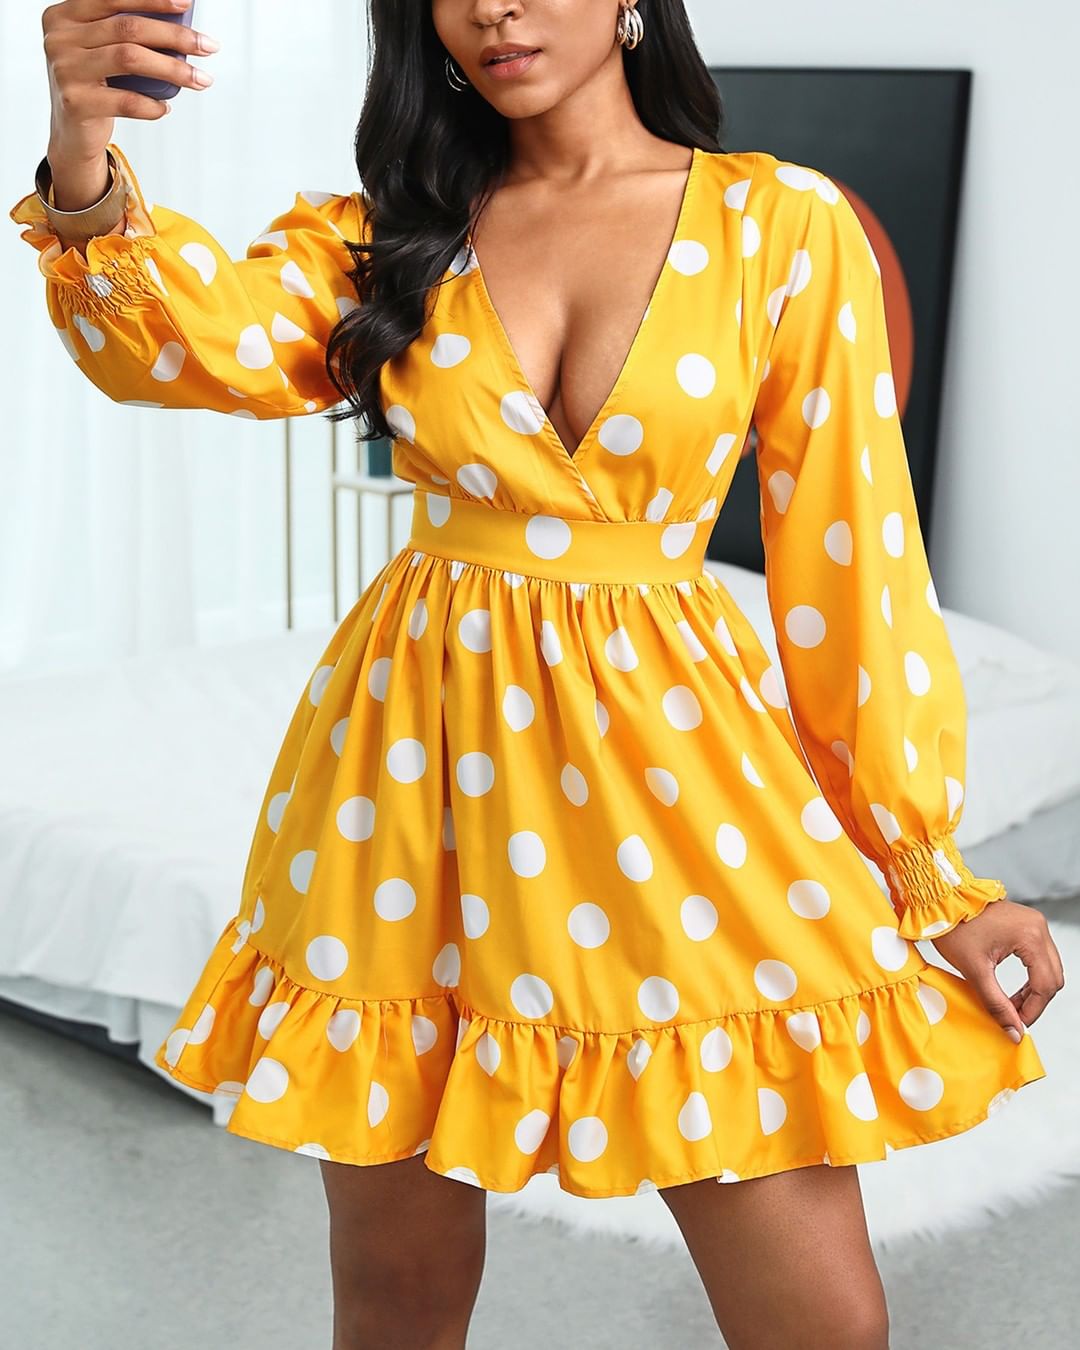 boutiquefeel_official - Plunge Polka Dots Shirring Design Ruched Ruffles Casual Dress⁠
Click https://www.boutiquefeel.com to ⁠
search LZQ1607 get size and price details ⁠
⁠
 #fashion #style #beautiful